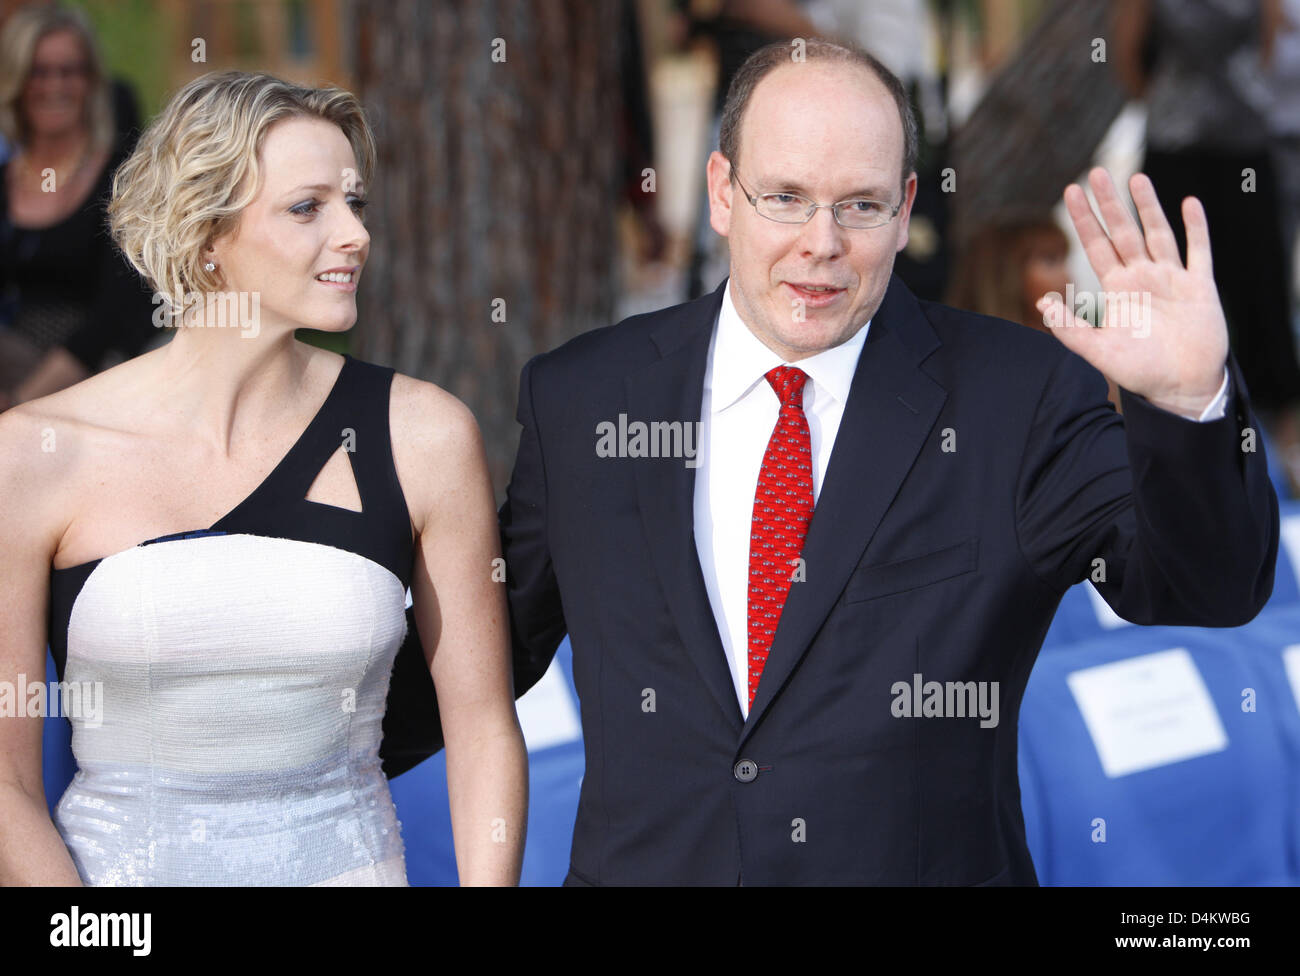 Prince Albert II of Monaco and his girlfriend Charlene Wittstock arrive at the fashion show of the Petra Ecclestone collection in Monte Carlo, Monaco, 22 May 2009. Petra Ecclestone is the daughter of Formula One boss Bernie Ecclestone. The Formula One Grand Prix of Monaco will take place on 24 May. Photo: JENS BUETTNER Stock Photo